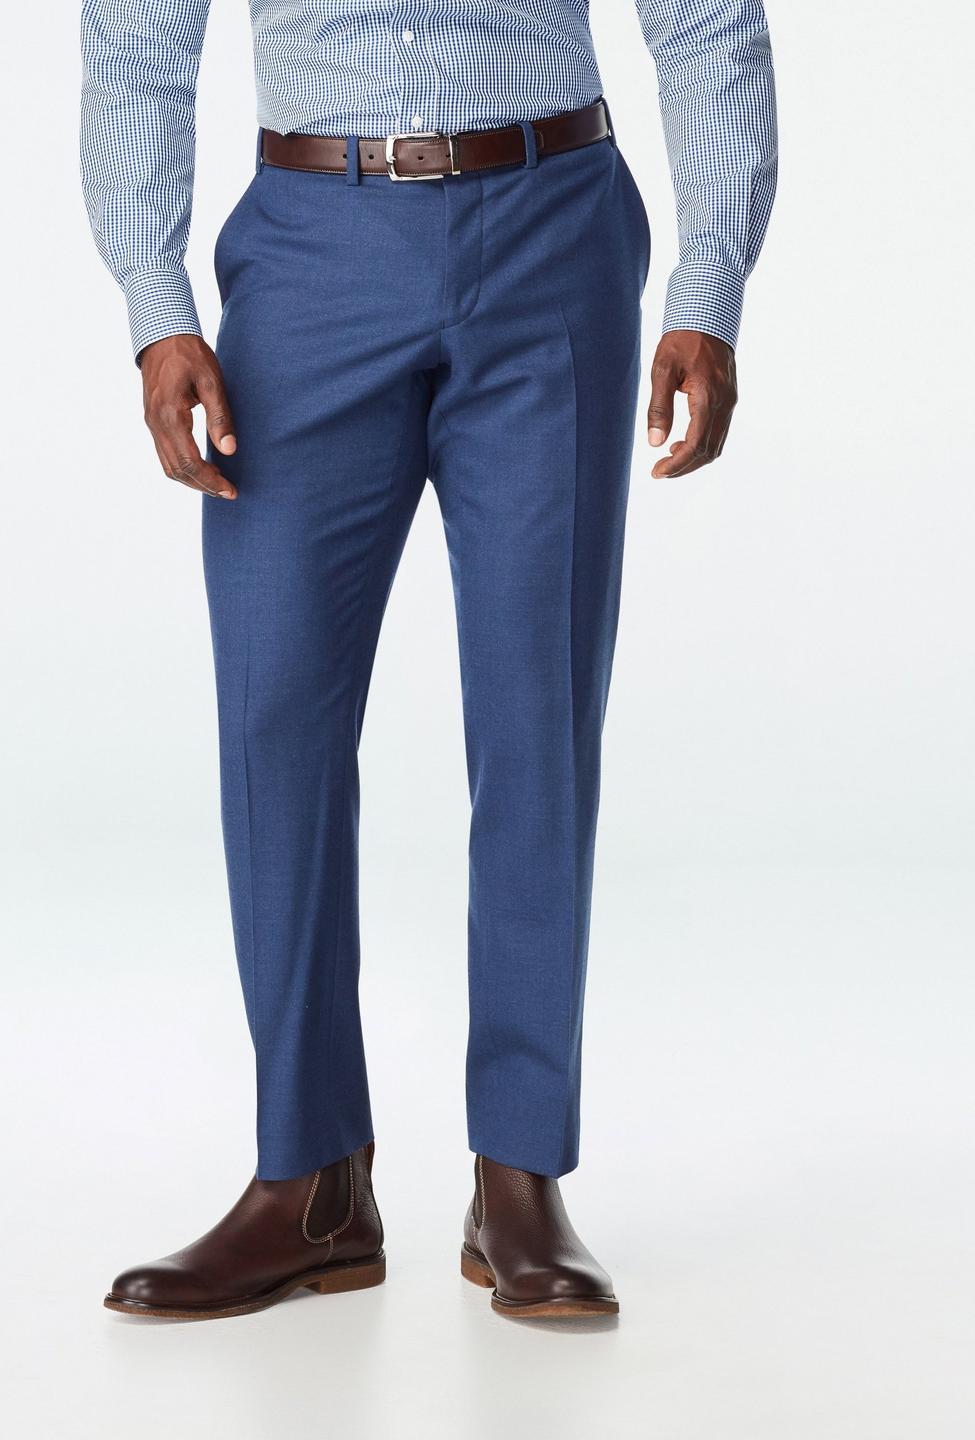 Blue pants - Hayward Solid Design from Luxury Indochino Collection